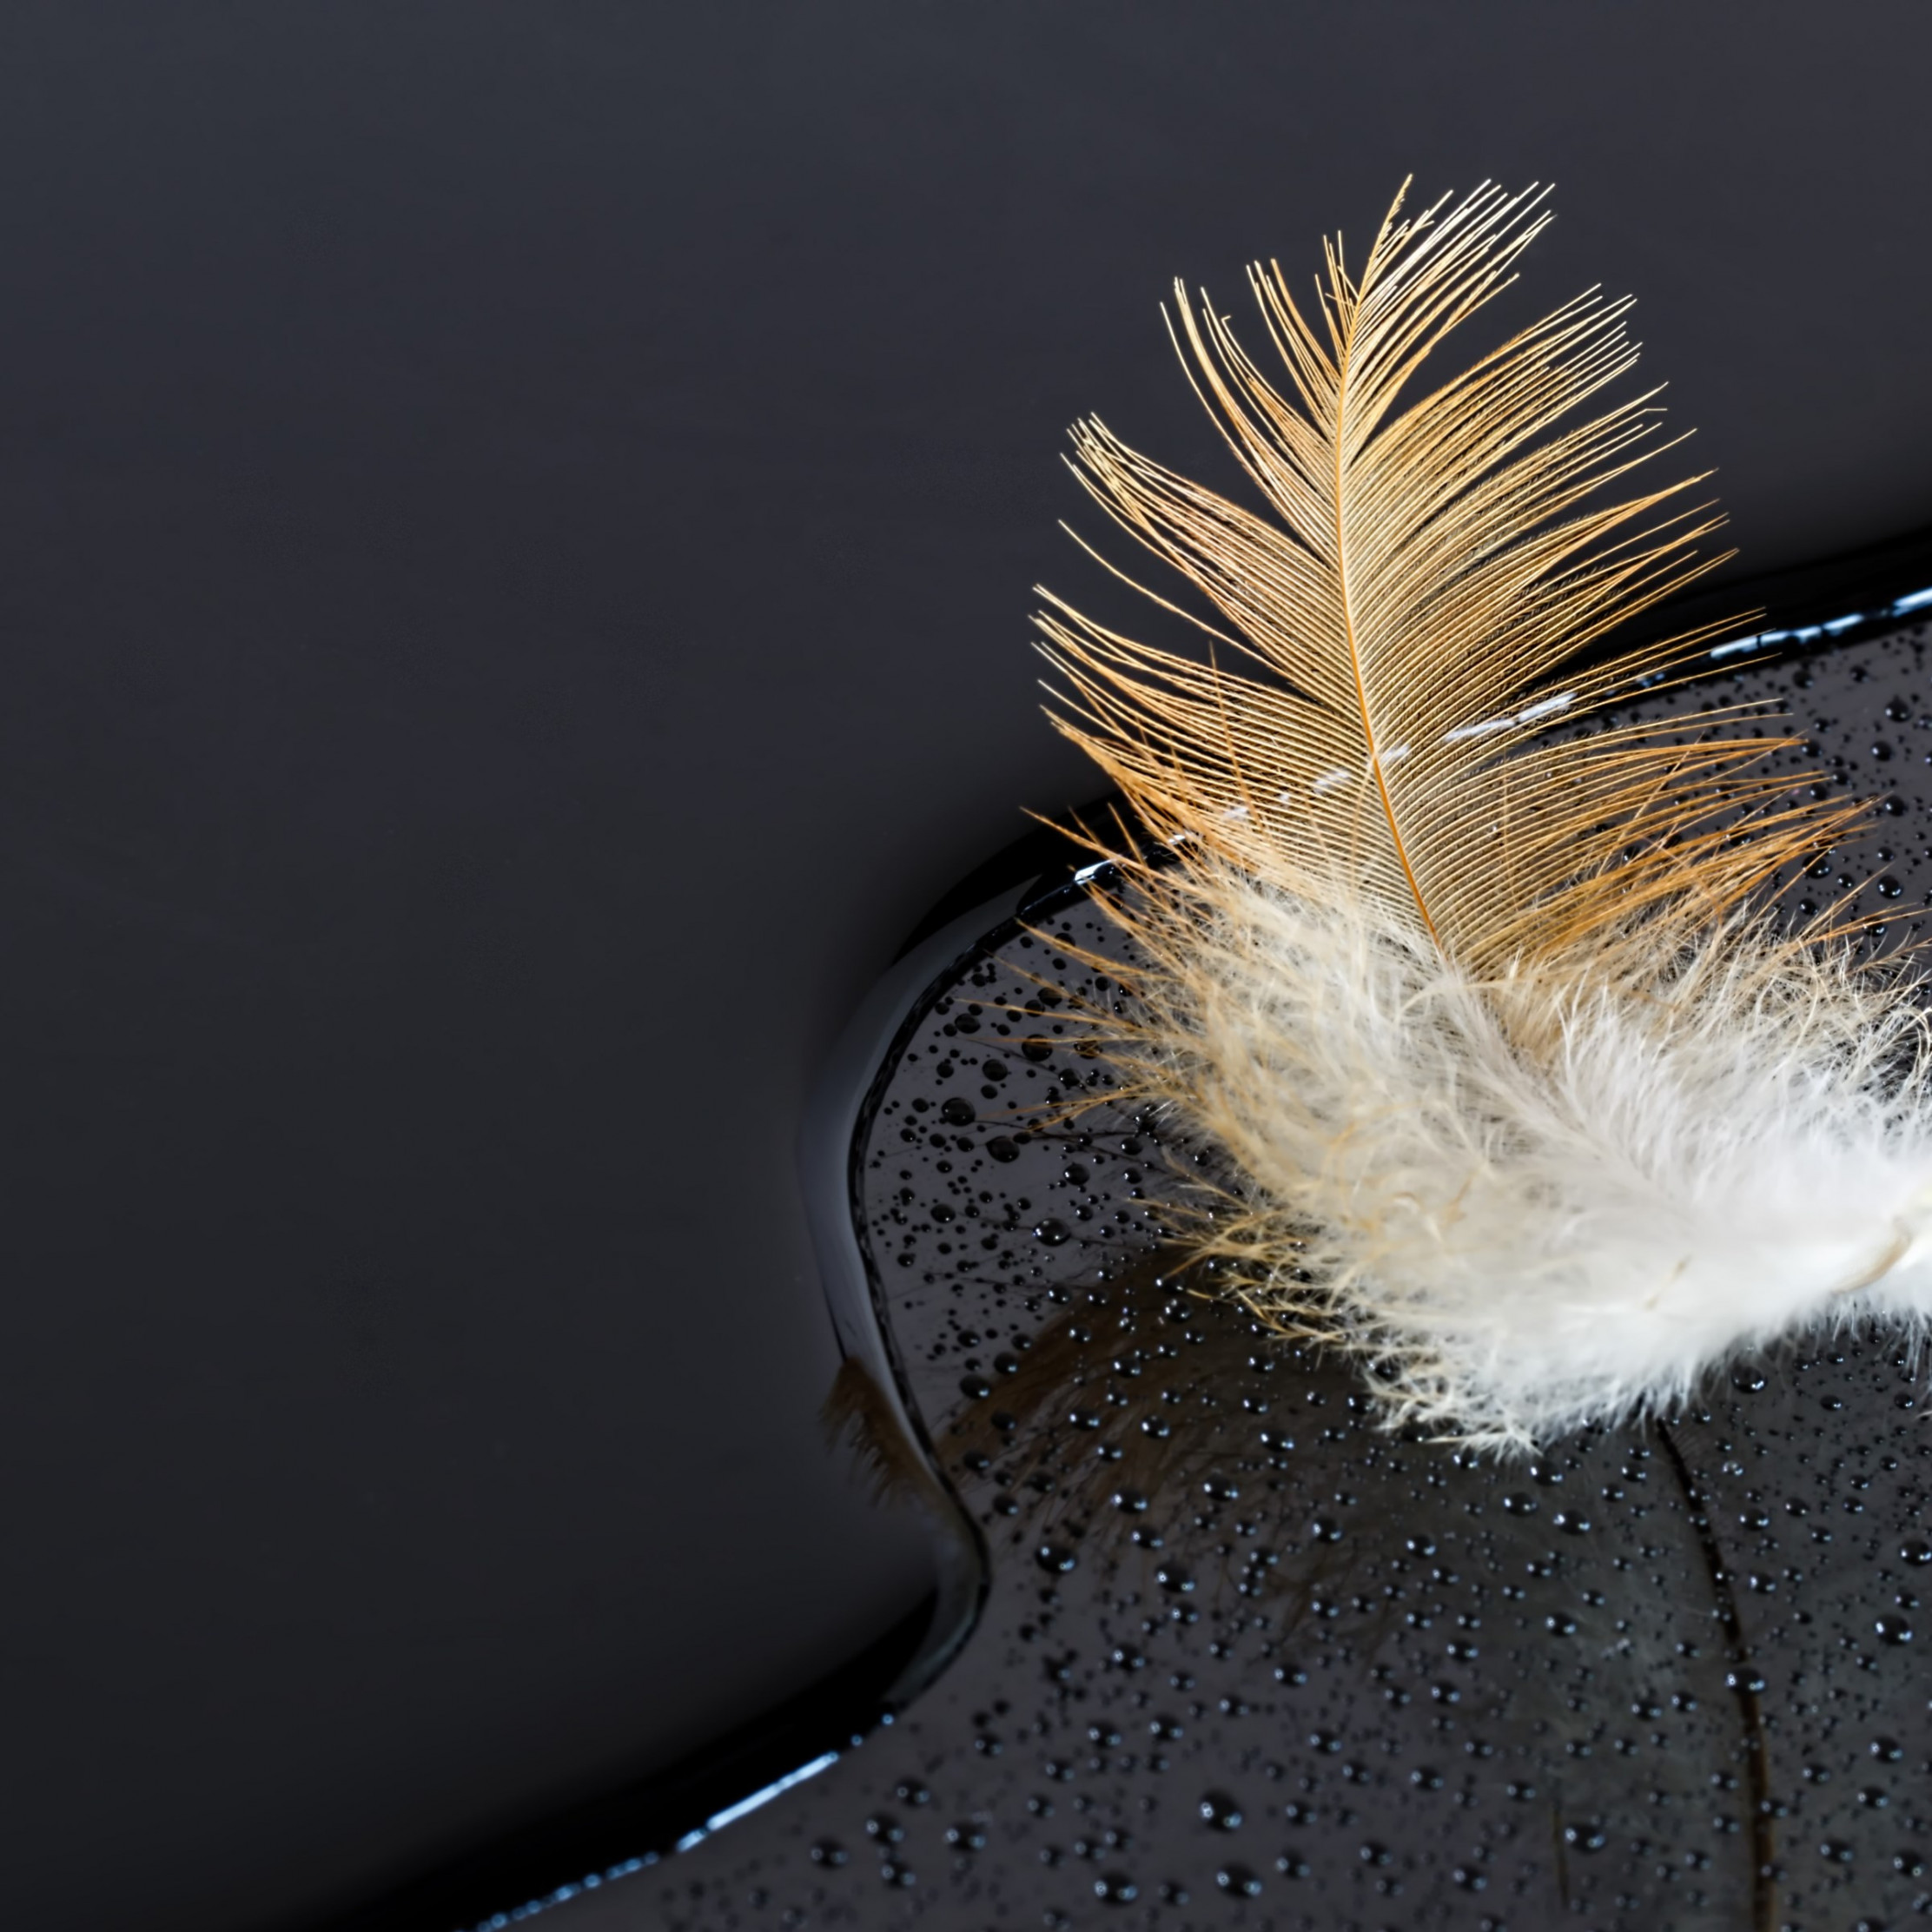 Dark surface with a feather on water wallpaper 2224x2224